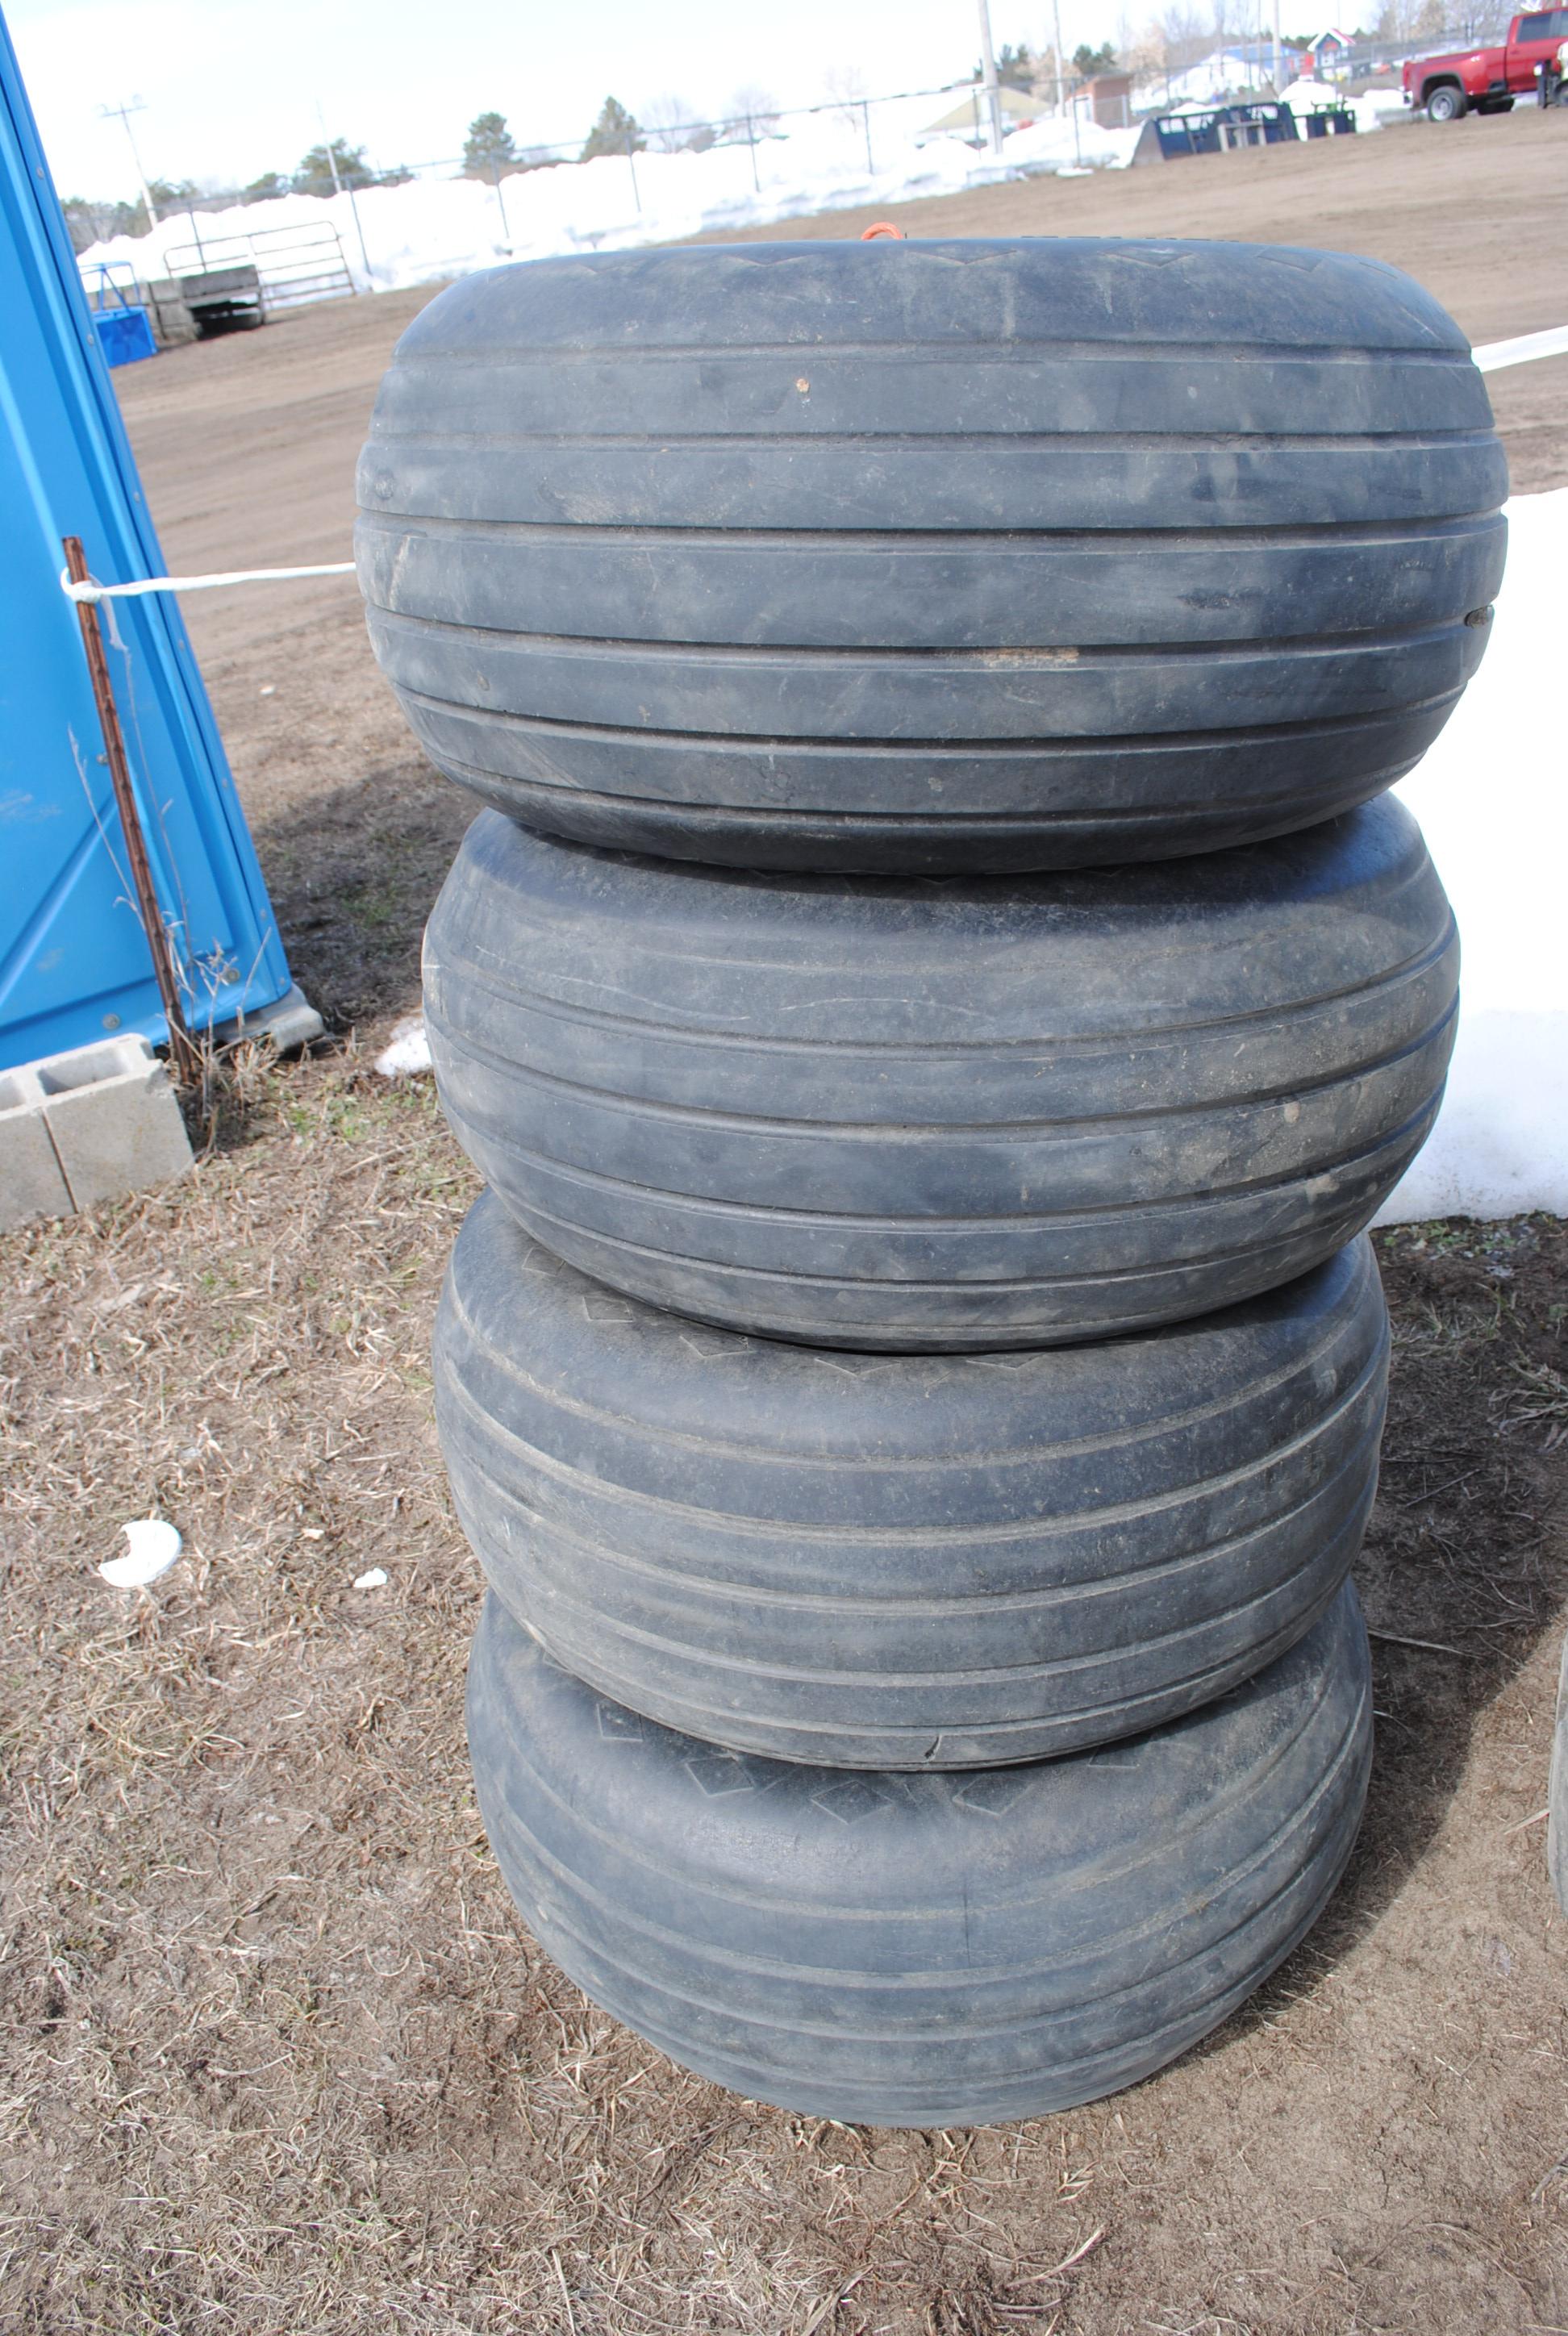 Set of 4 Goodyear implement tires 12.5-15L (sell as set)